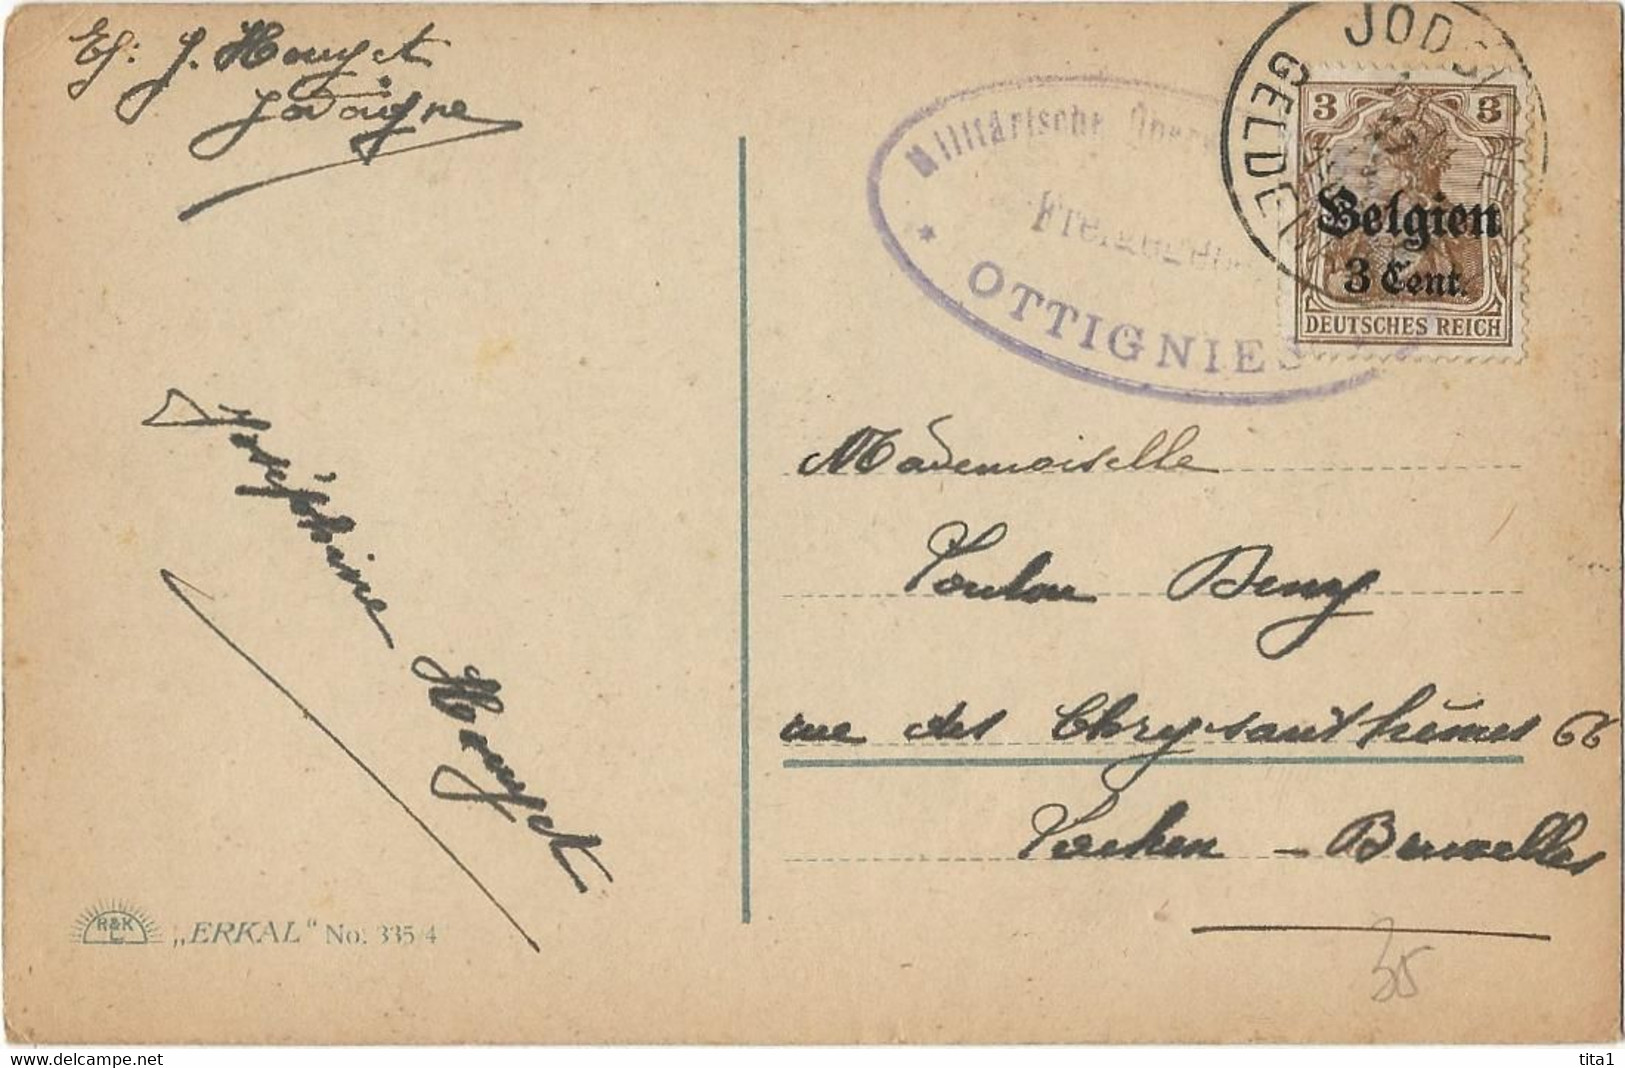 914 - Jeune Dame  - Mia May  " Cachet Militaire Allemand - Guerre 14 - Ottignies) - Usabal